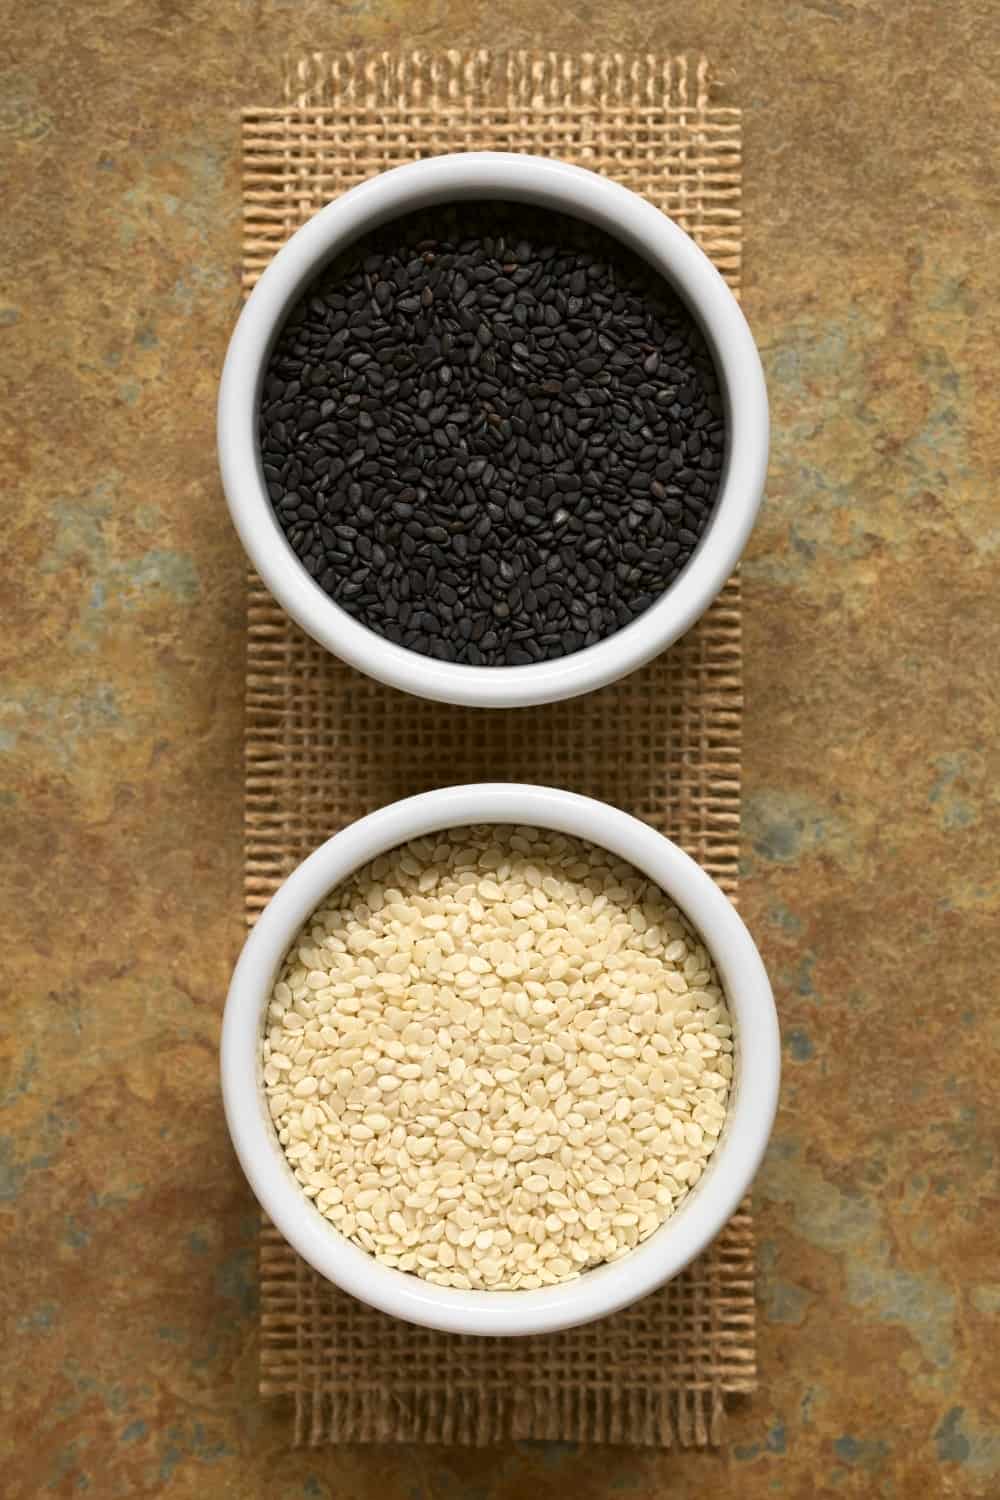 Black and white sesame seeds in small bowls